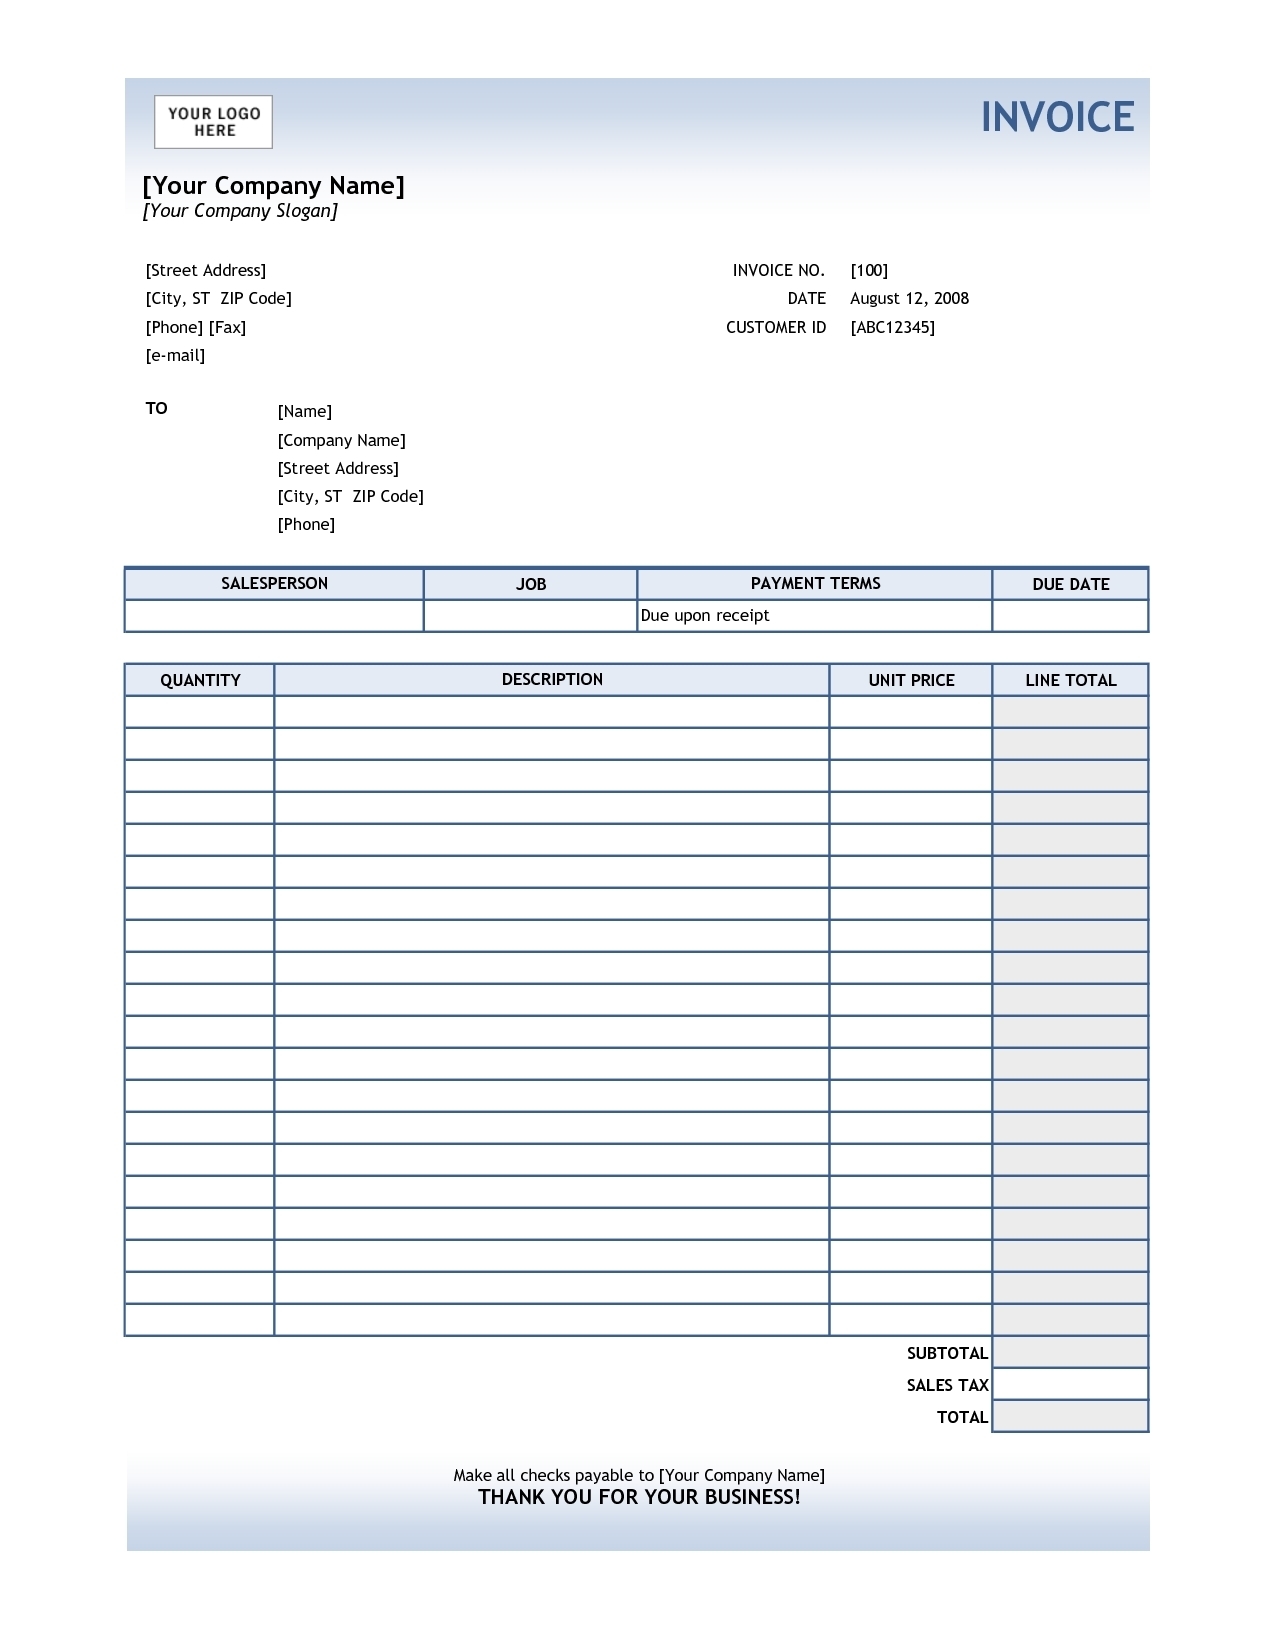 invoice format in excel with service tax design invoice template invoice format in excel